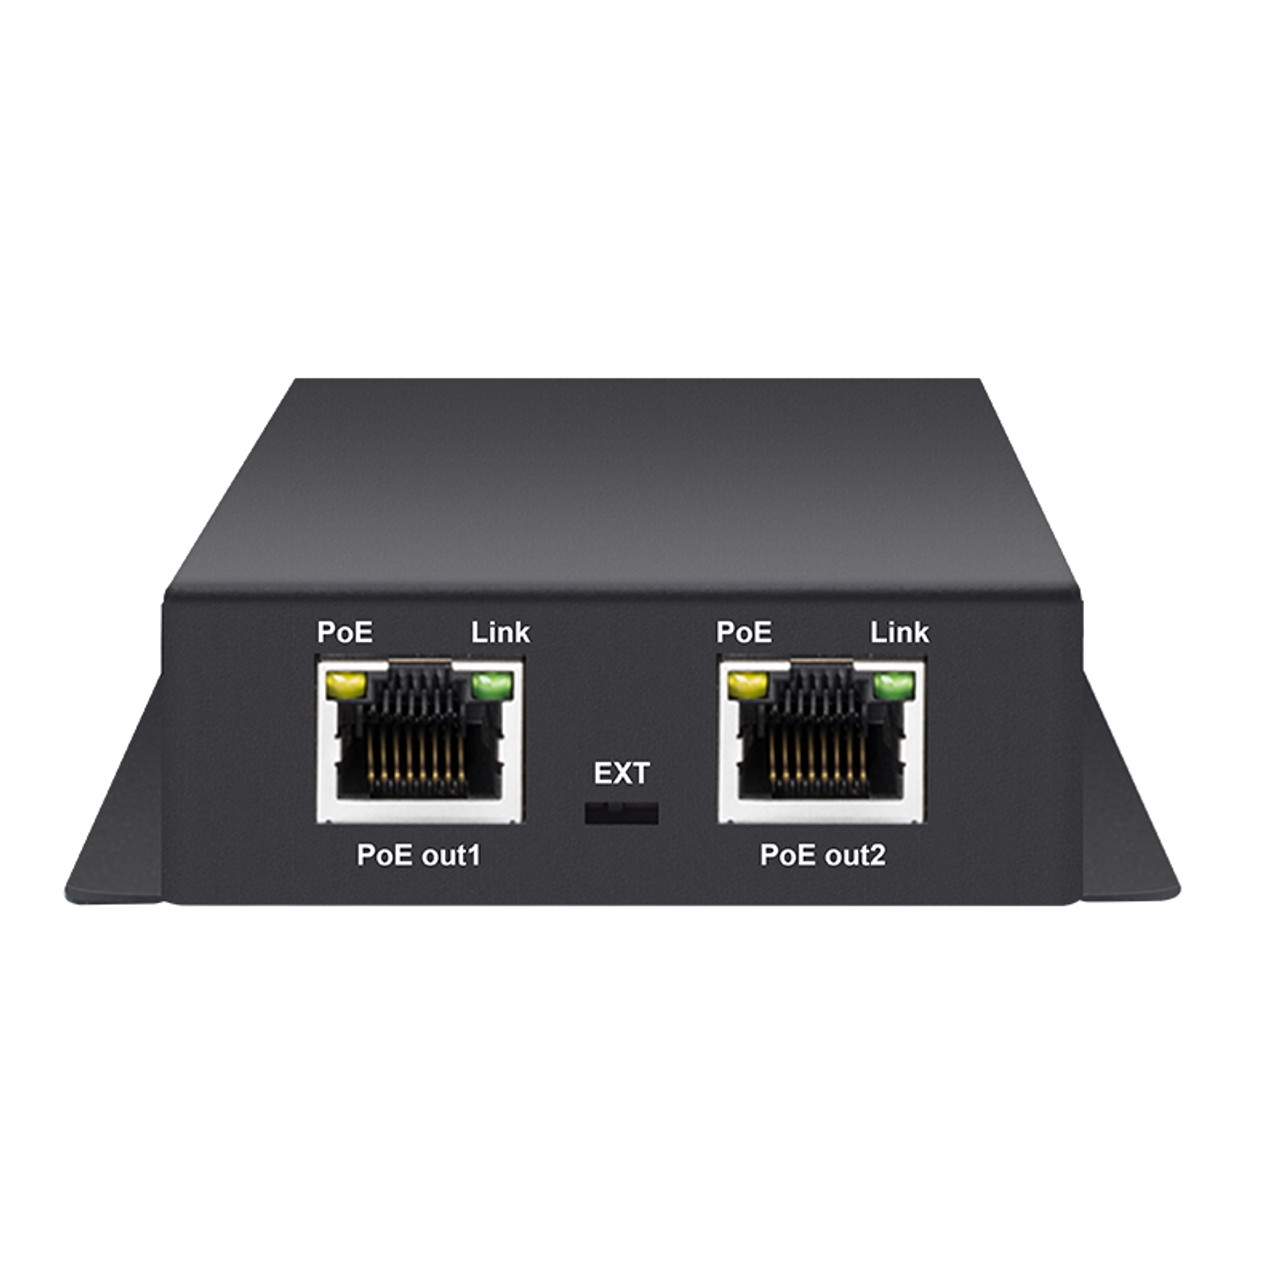 MokerLink 5 Ports Gigabit PoE Extender, IEEE 802.3af/at PoE Repeater,  100/1000Mbps, 1 PoE in 4 PoE Out PoE Passthrough Switch, Wall Mount, PoE  Extender/Injector/Network Extender 3 in 1